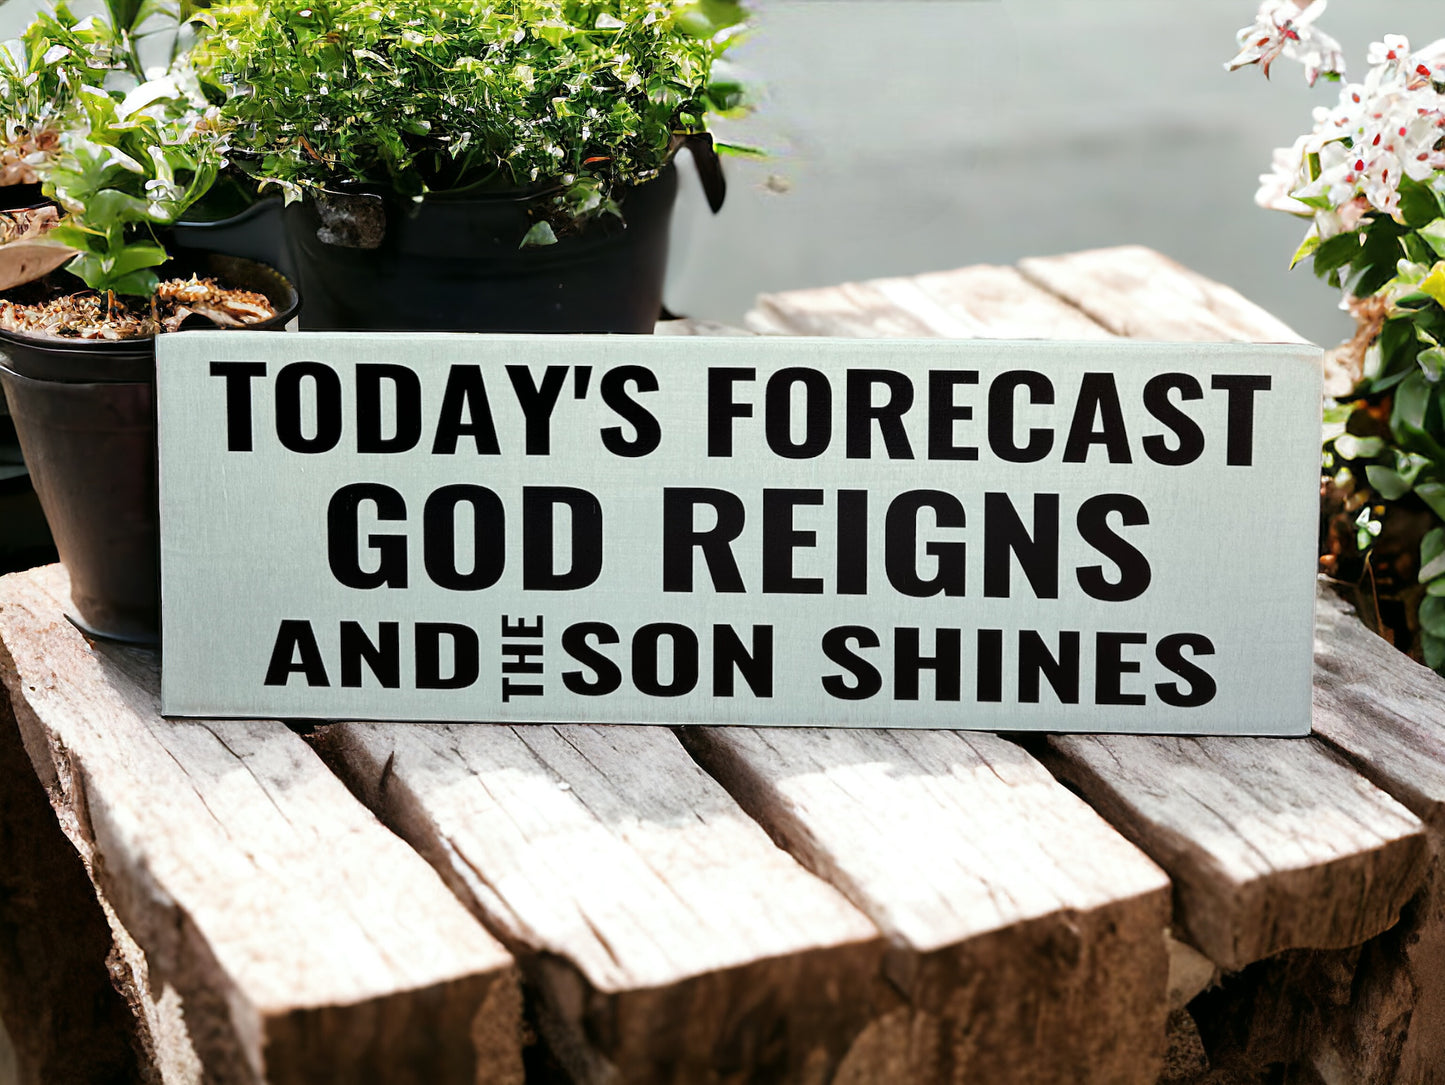 Today's Forecast God Reigns - Rustic Wood Sign